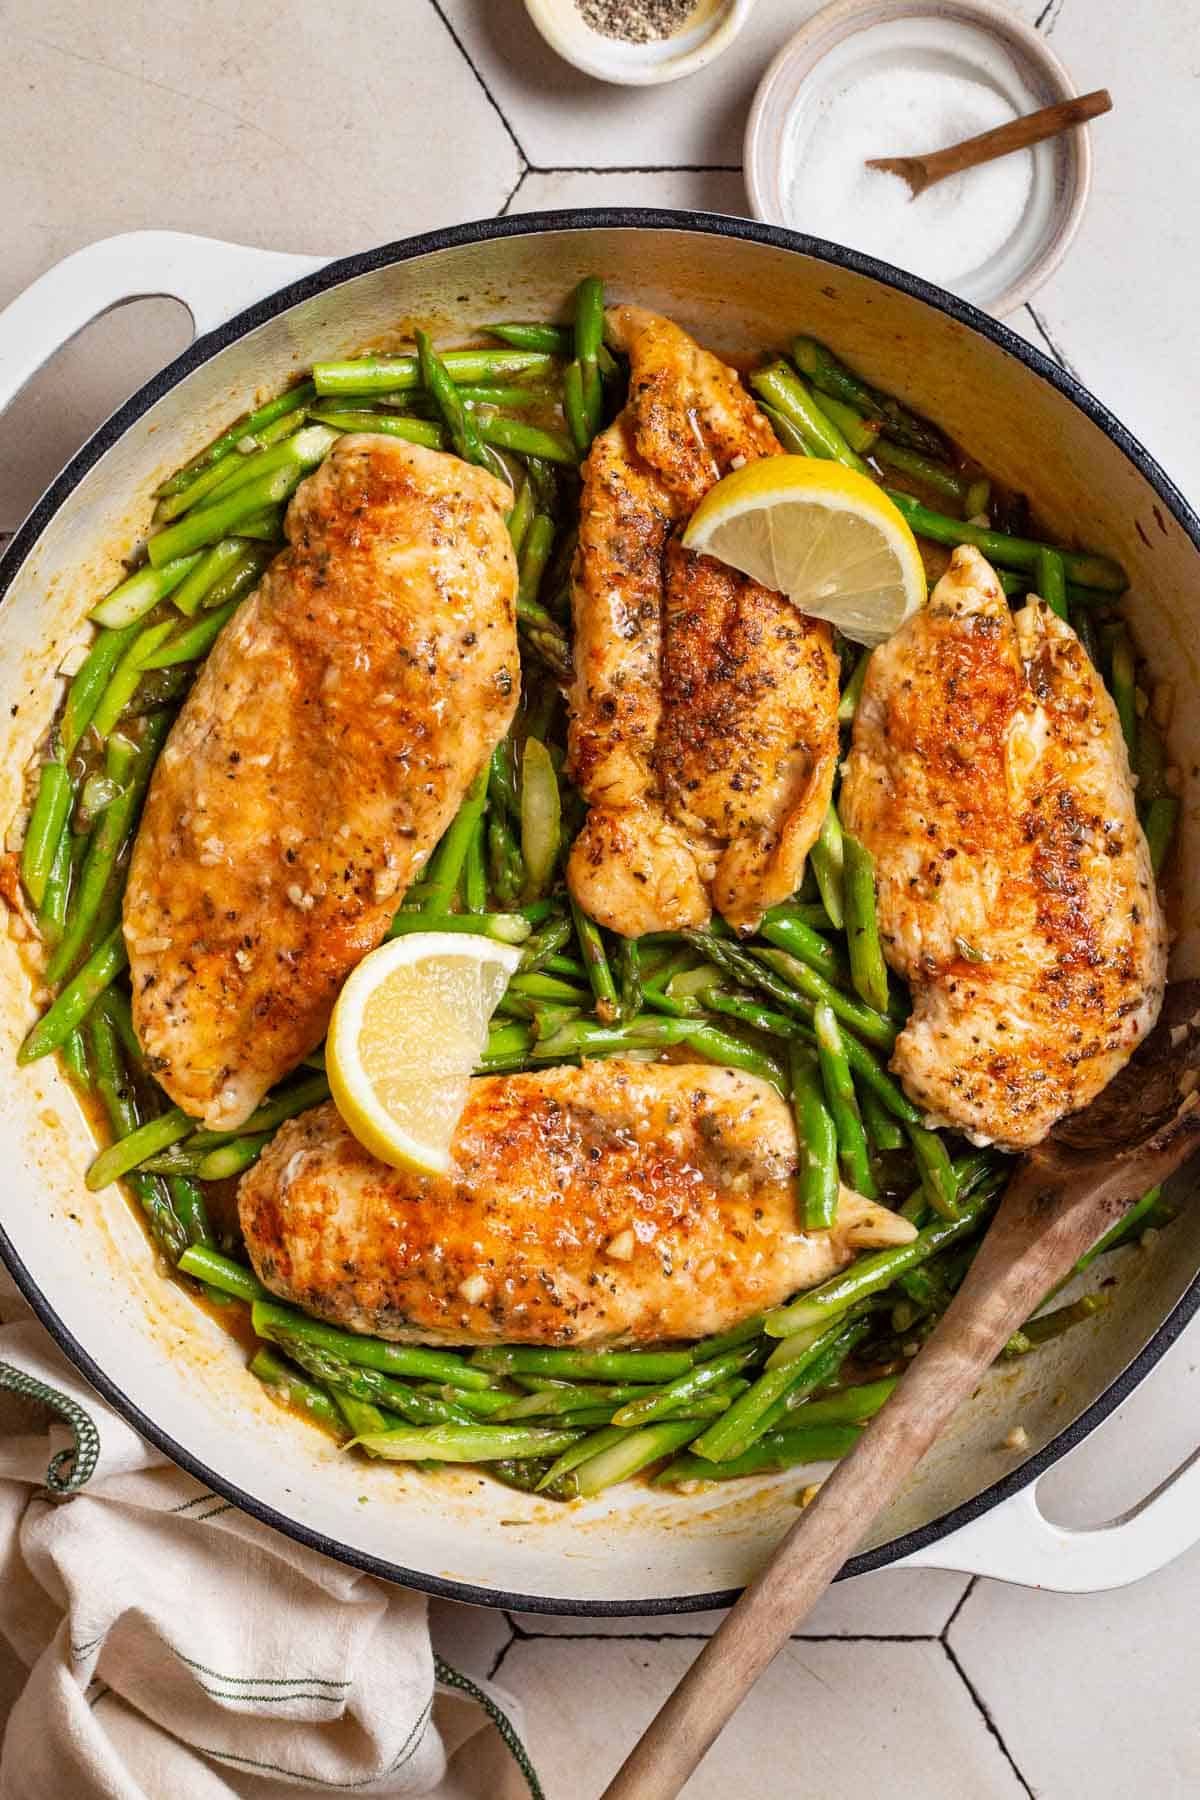 An overhead photo of chicken and asparagus in a skillet with lemon wedges and a wooden spoon. Next to this are small bowls of salt and pepper, and a kitchen towel.